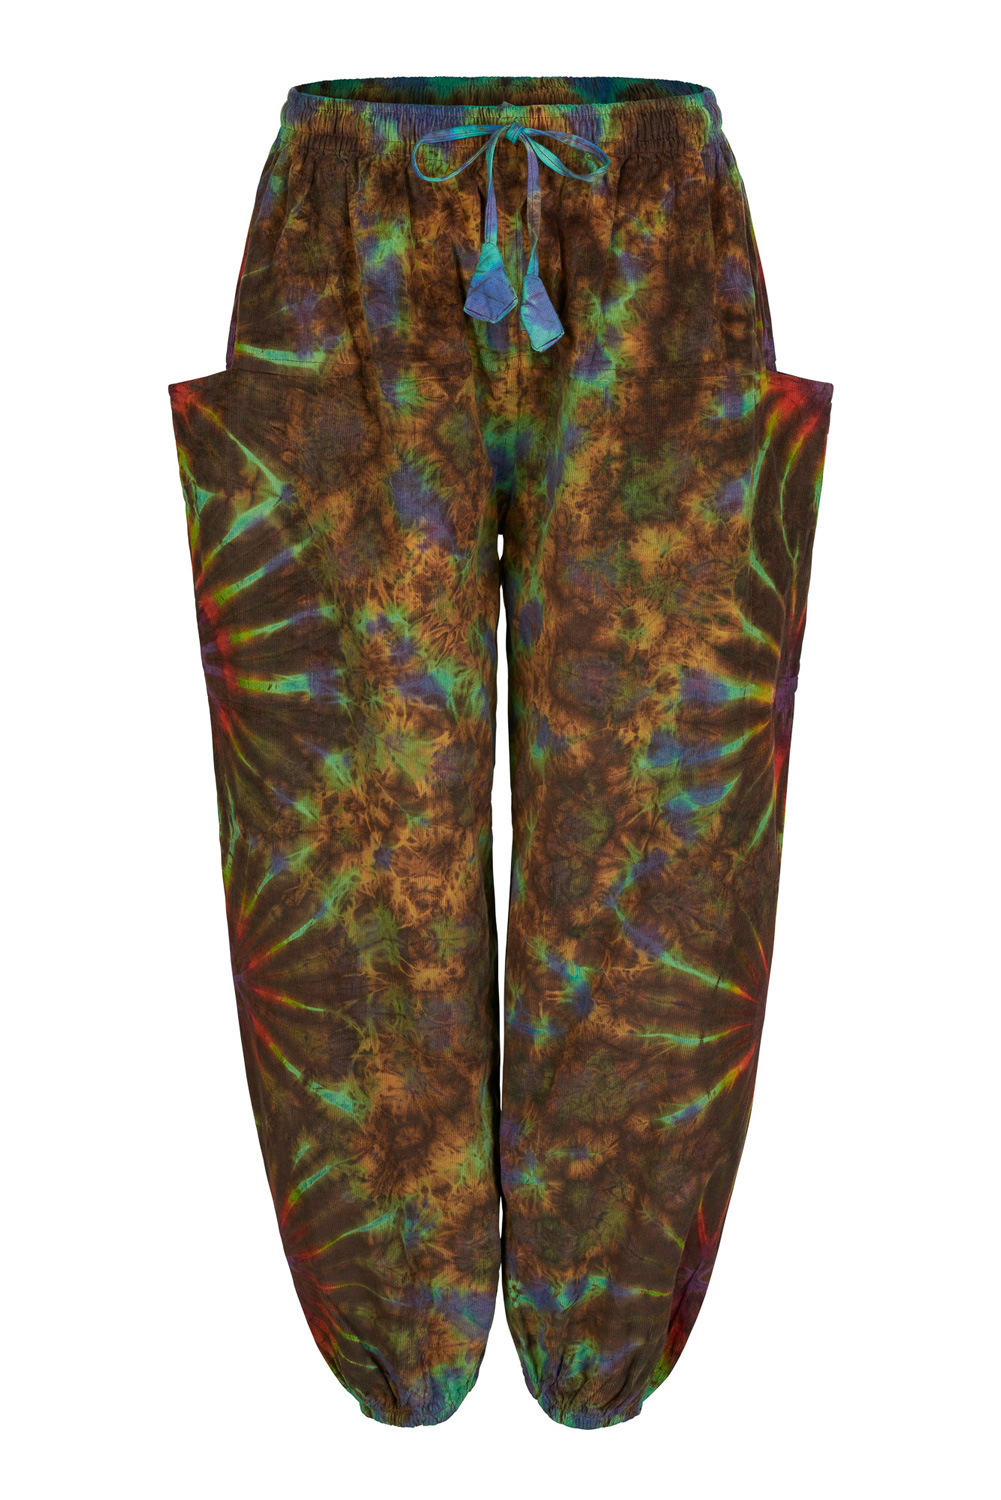 Corduroy tie dye baggy trousers - Green colour only